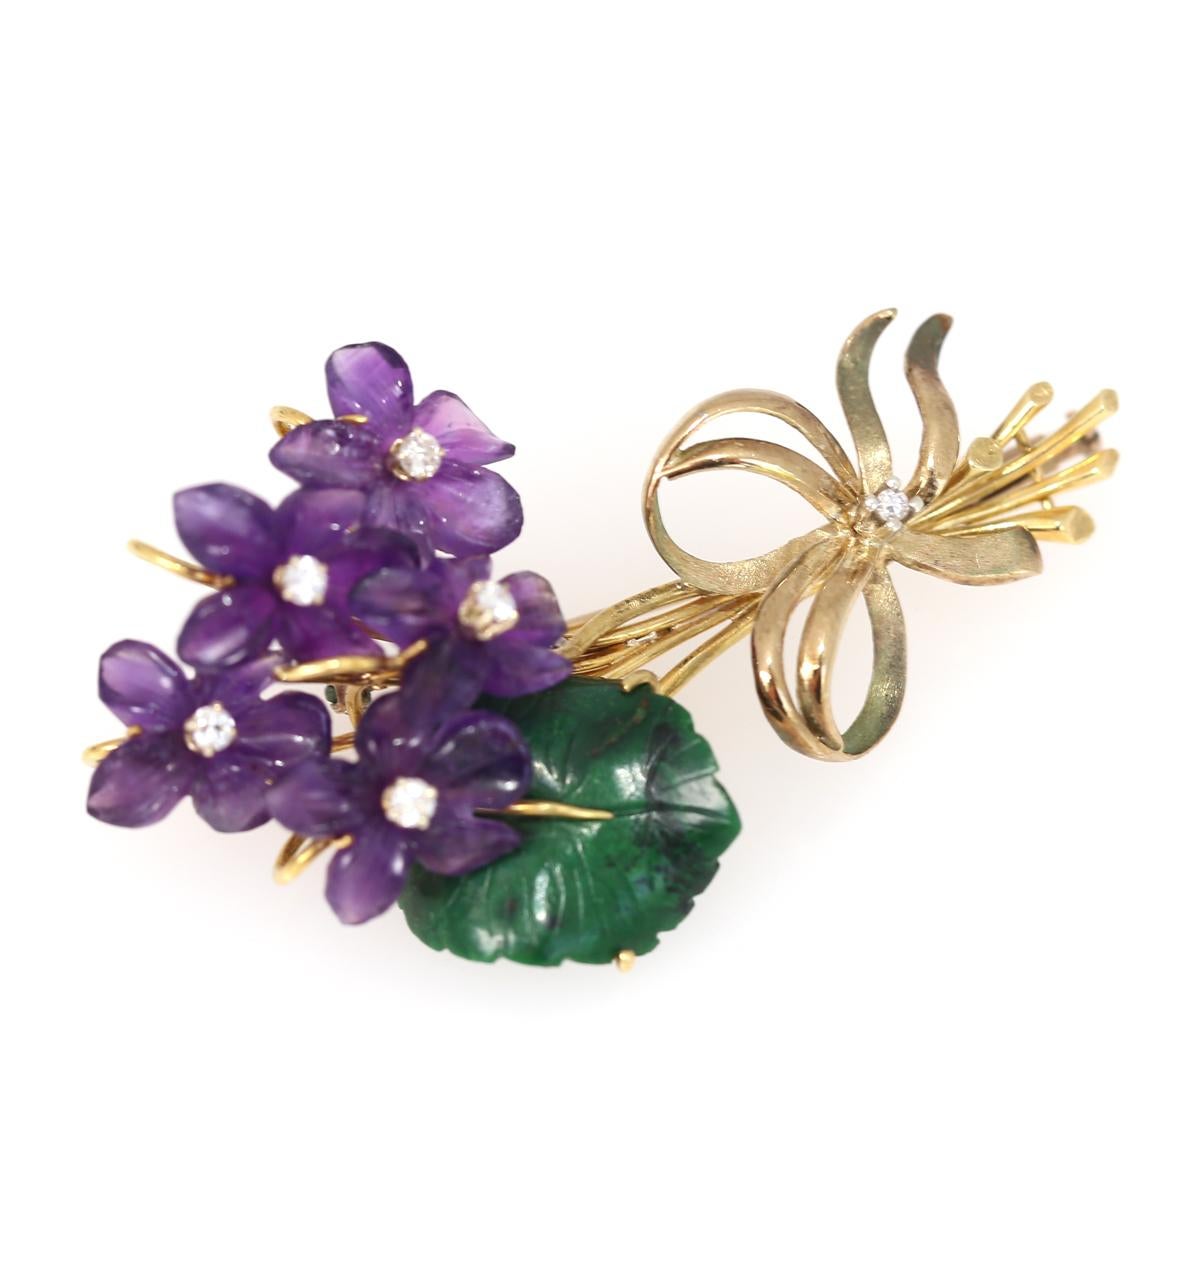 Violet flowers brooch comprising: Amethyst, Jade (jadeite) and Diamonds.
Yellow gold Stamped LIV 18K. 
Five engraved amethyst flowers with a green leaf made of jadeite. In the centre of the flower, there are fine tiny white Diamonds. 
Once it was